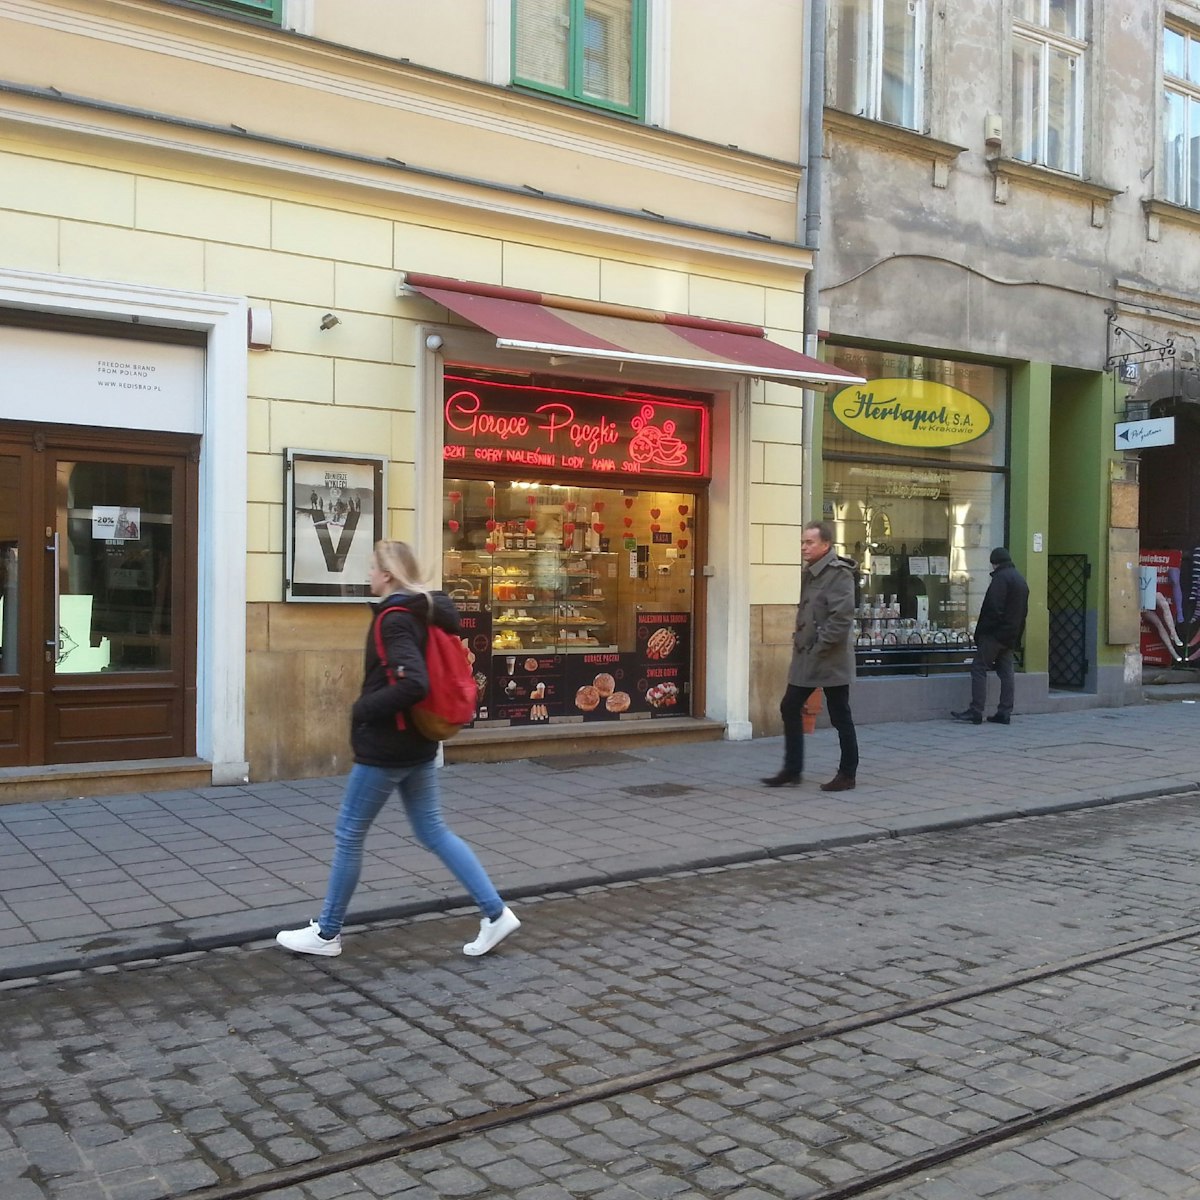 Gorace Paczki, as you head into the square, you'll notice this neon window